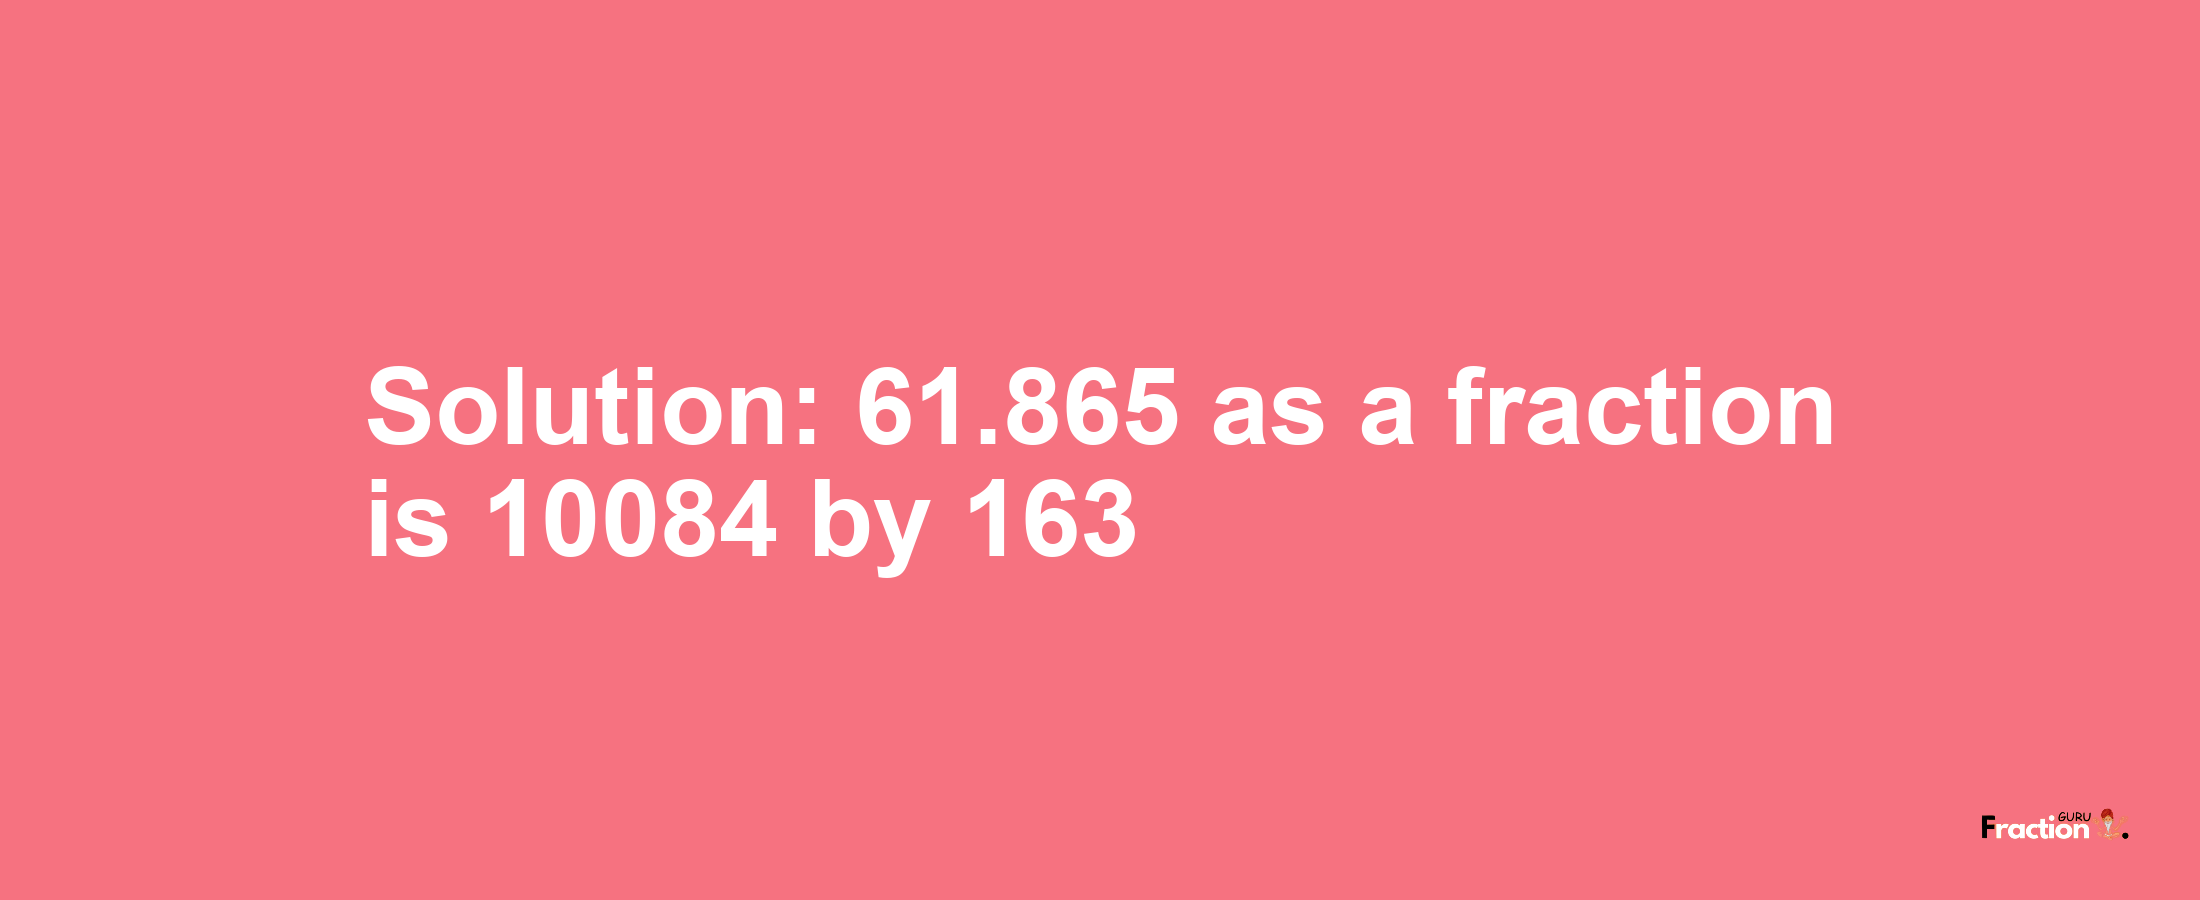 Solution:61.865 as a fraction is 10084/163